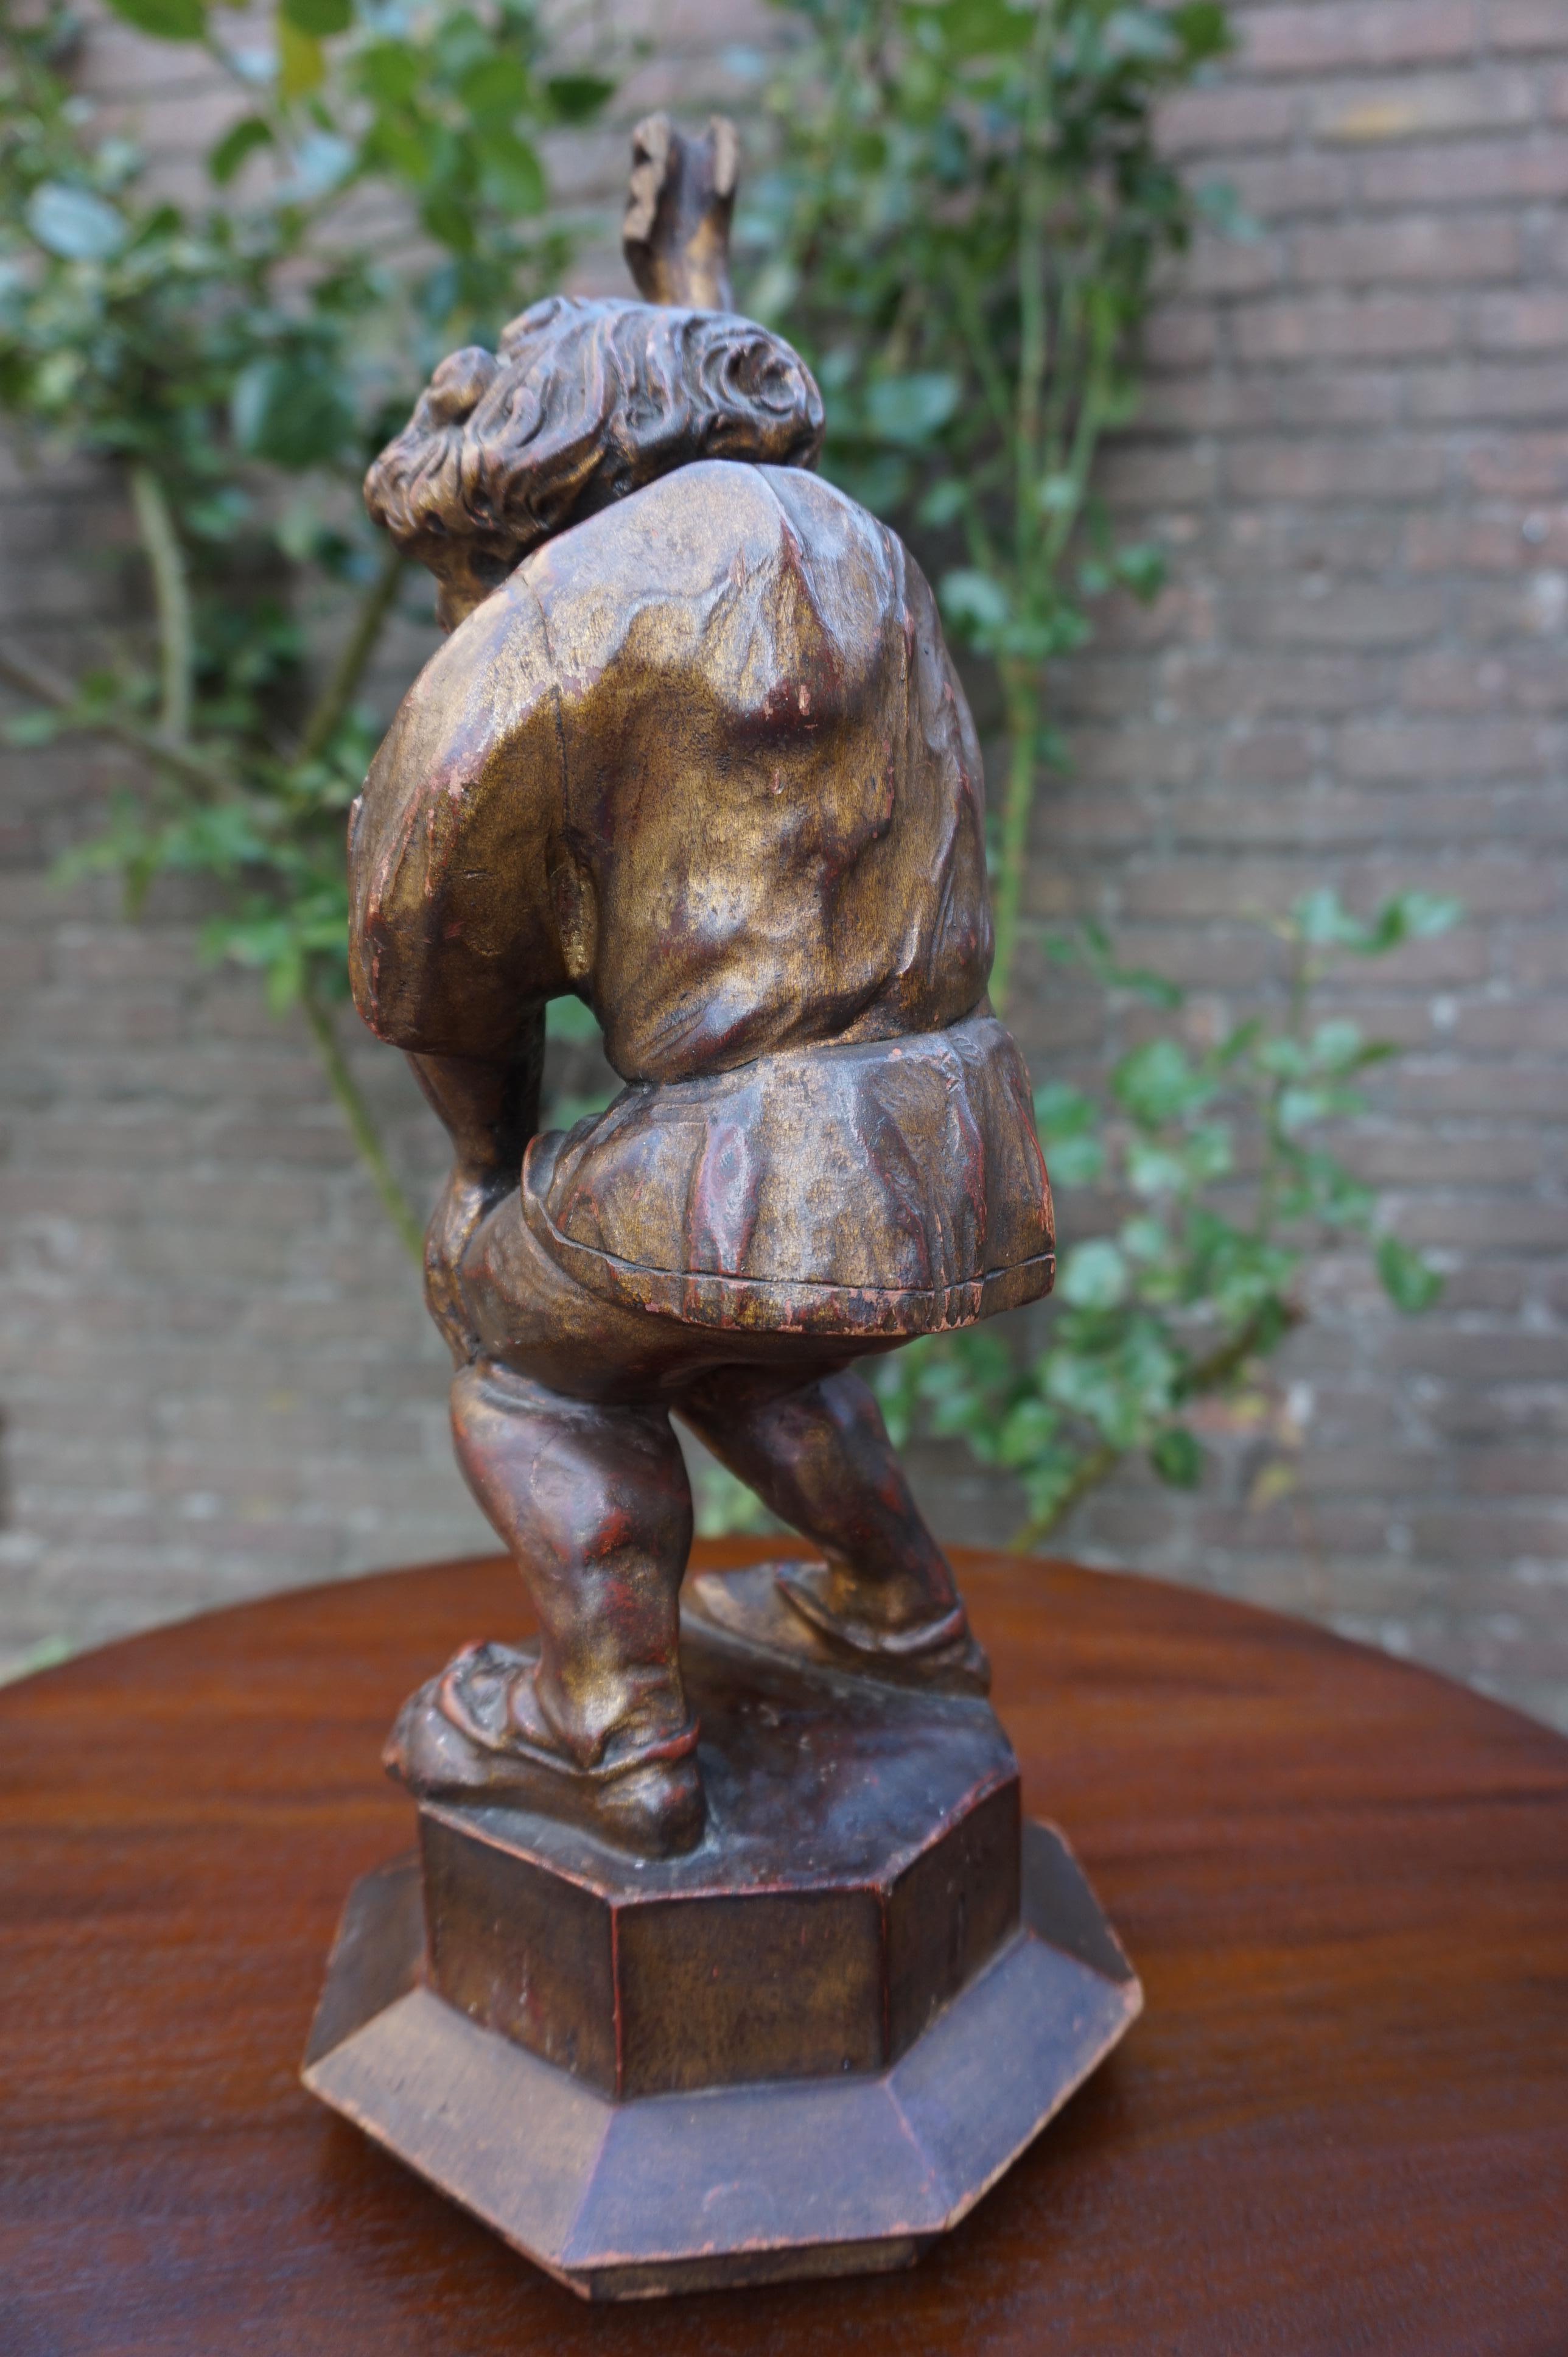 Very rare, 19th century statuette of Victor Hugo's famous novel character.

If you are a collector of rare novel and/or famous movie characters then this 19th century sculpture of Quasimodo, better known as the Hunchback of Notre Dame, could be the